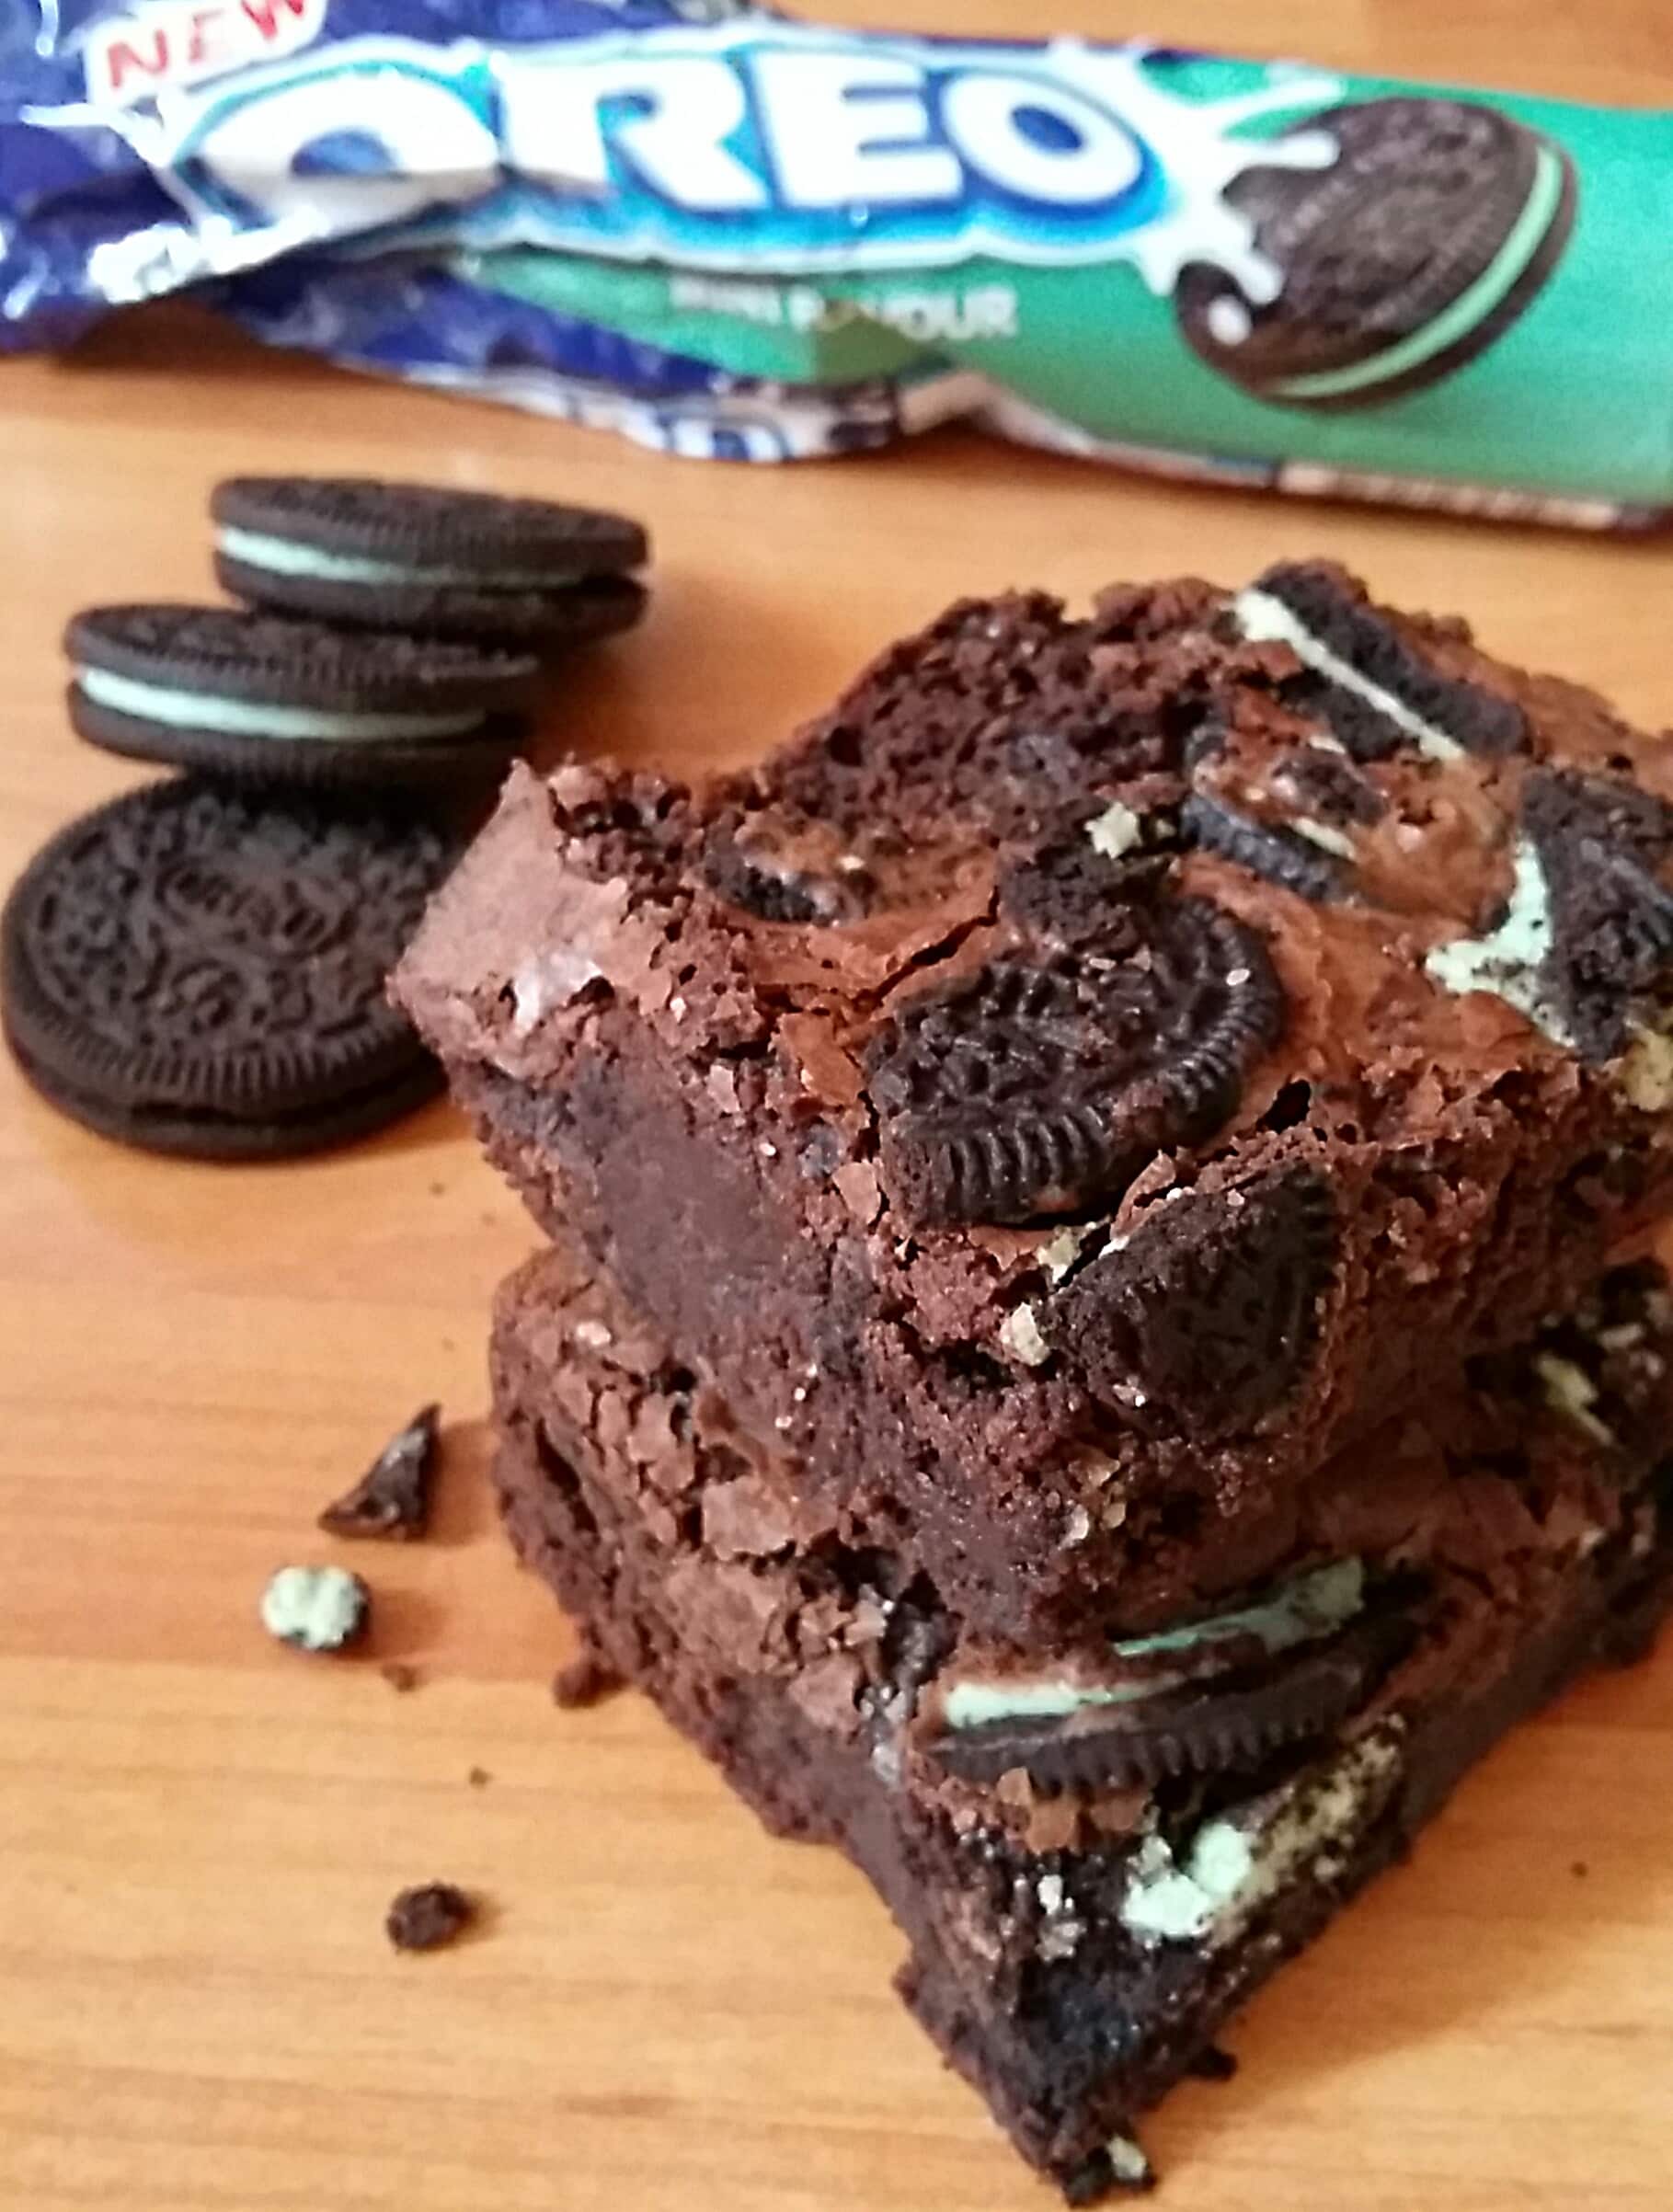 Three Mint Oreo Brownies sitting on top of each other. A packet of mint Oreo cookies can be seen in the background